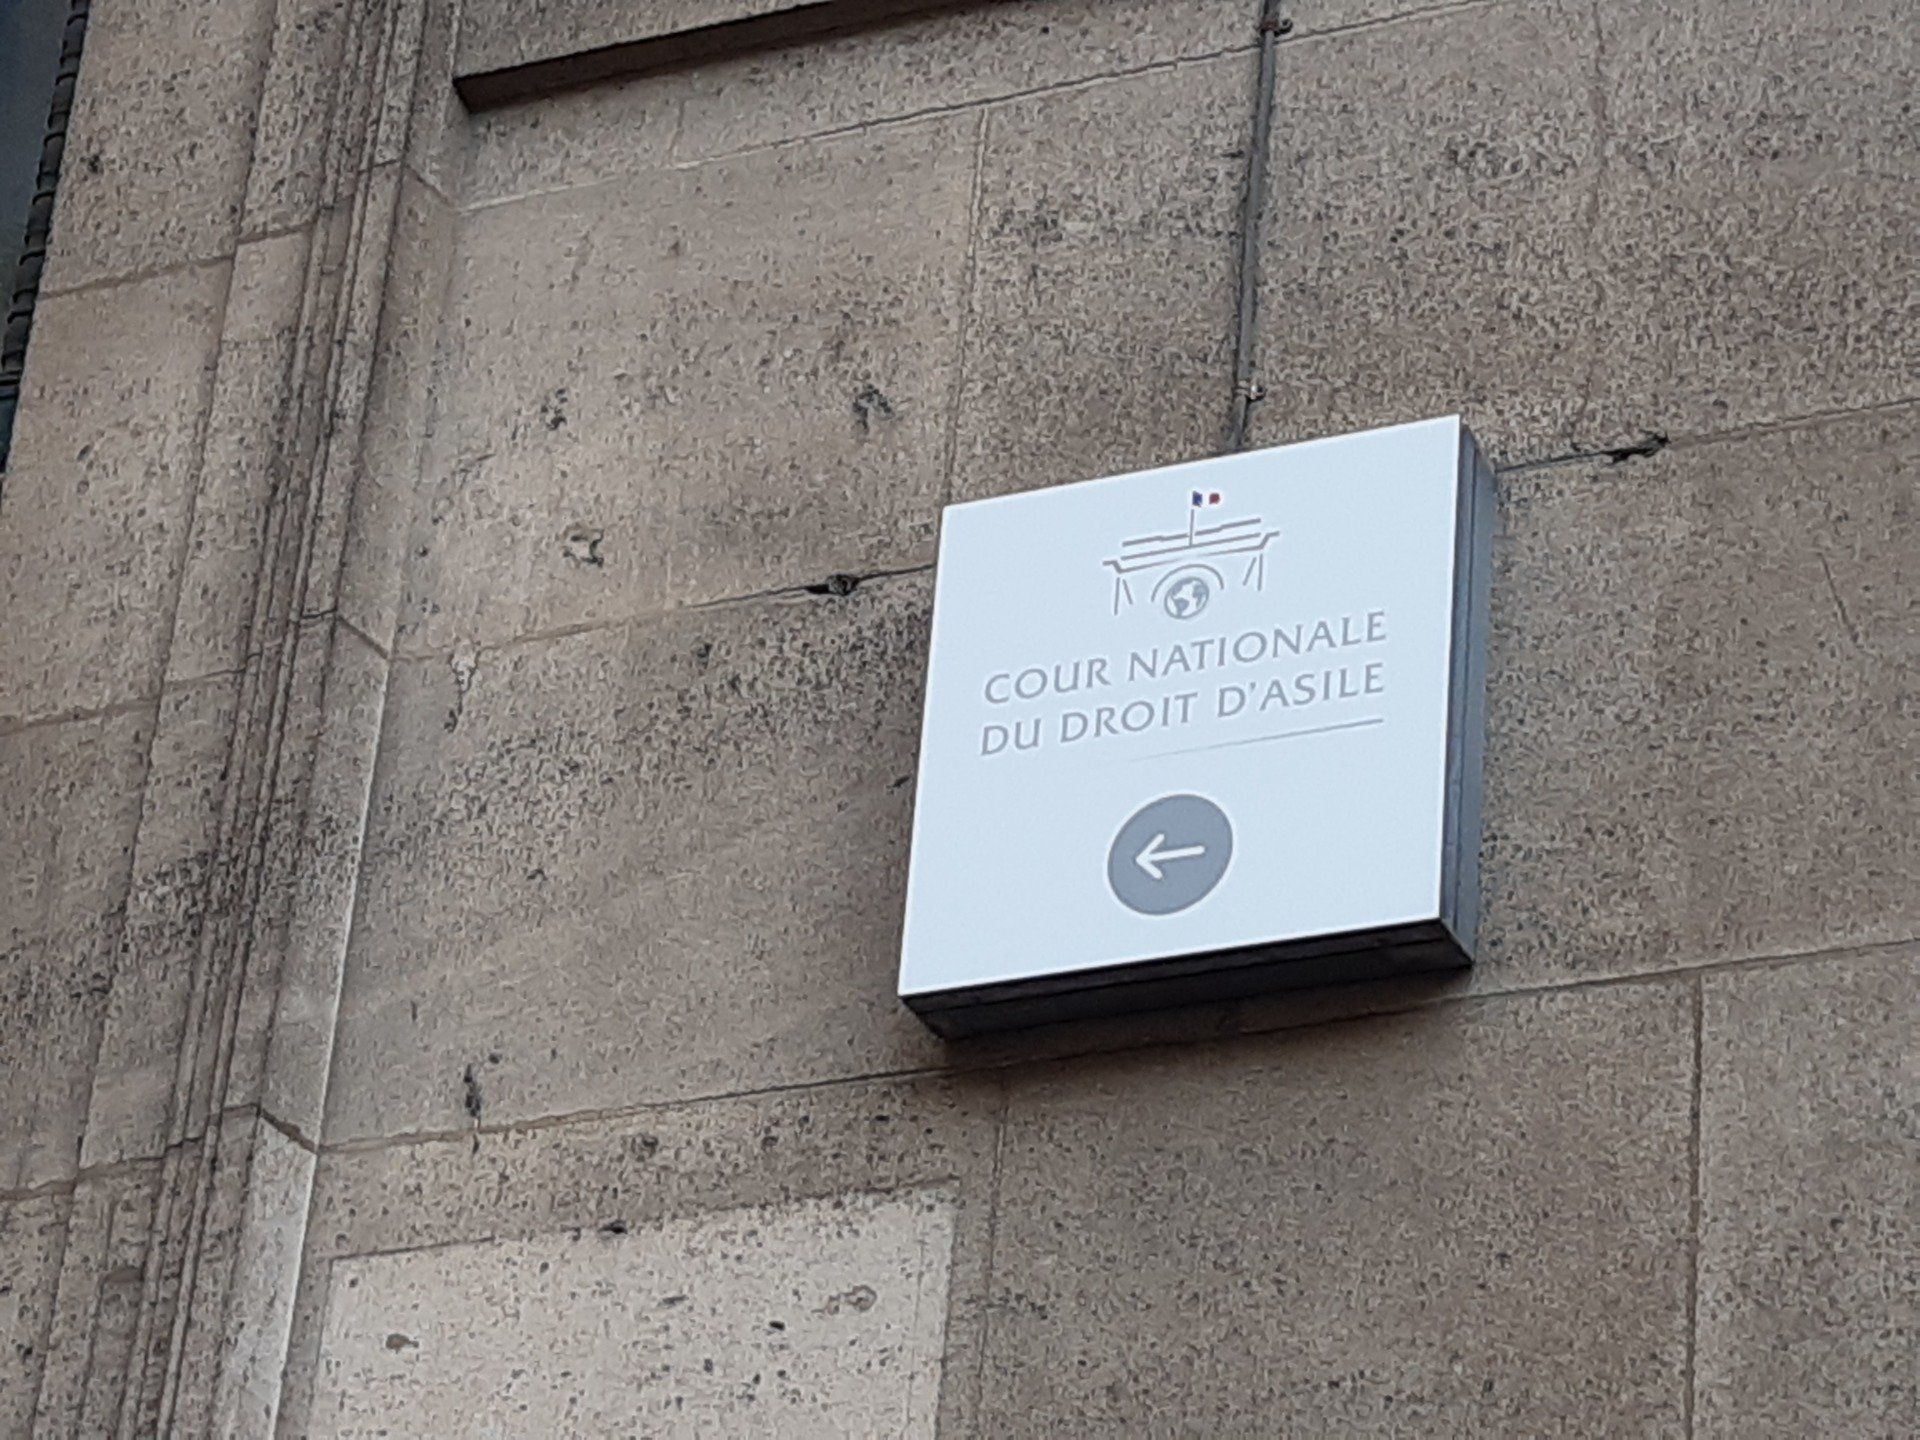 Cour nationale